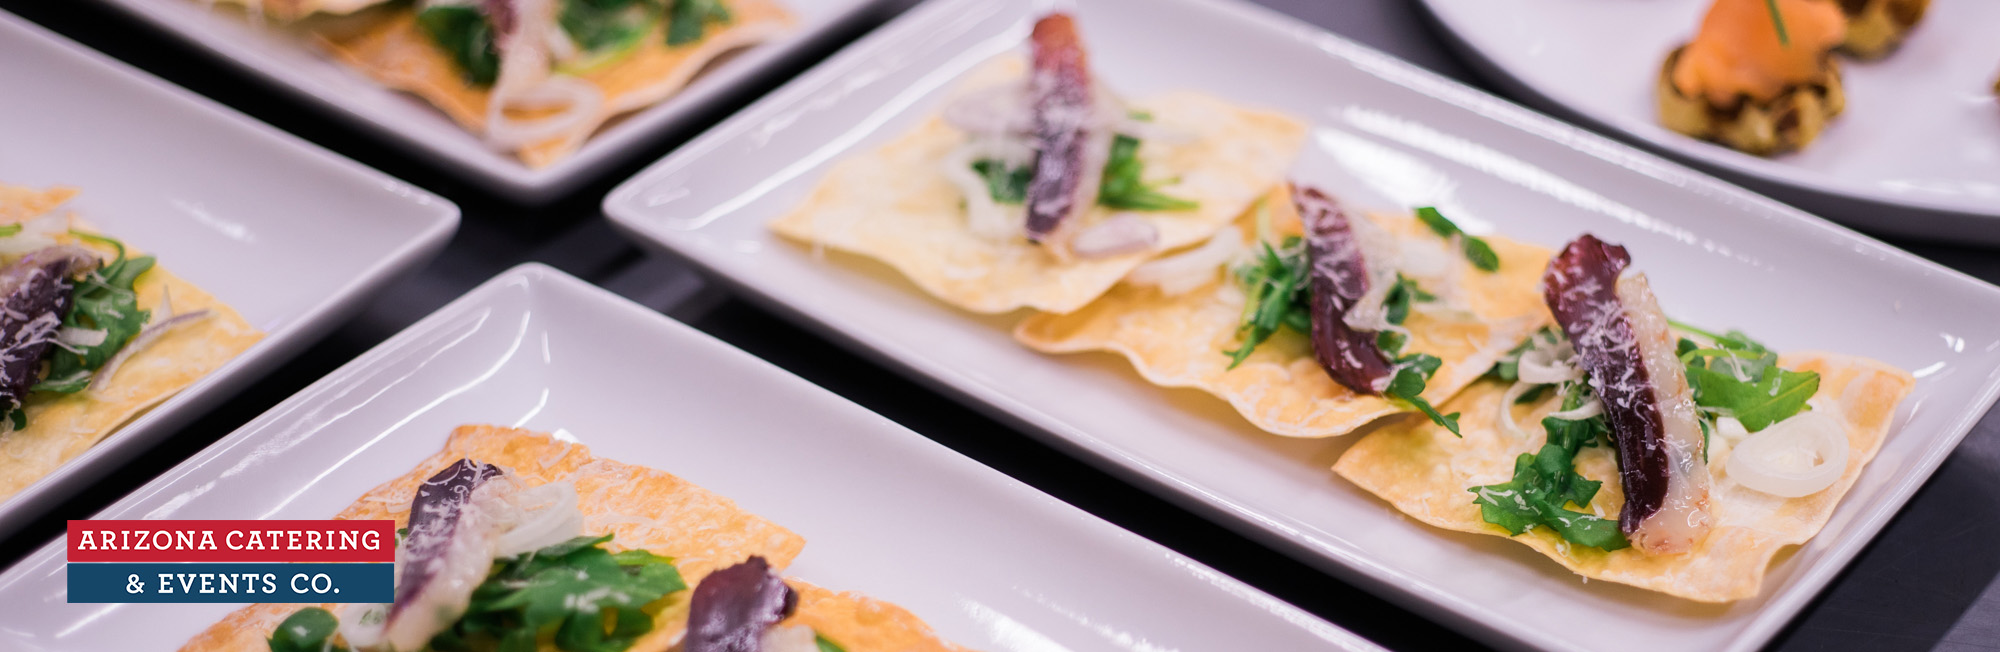 Catering Header Image